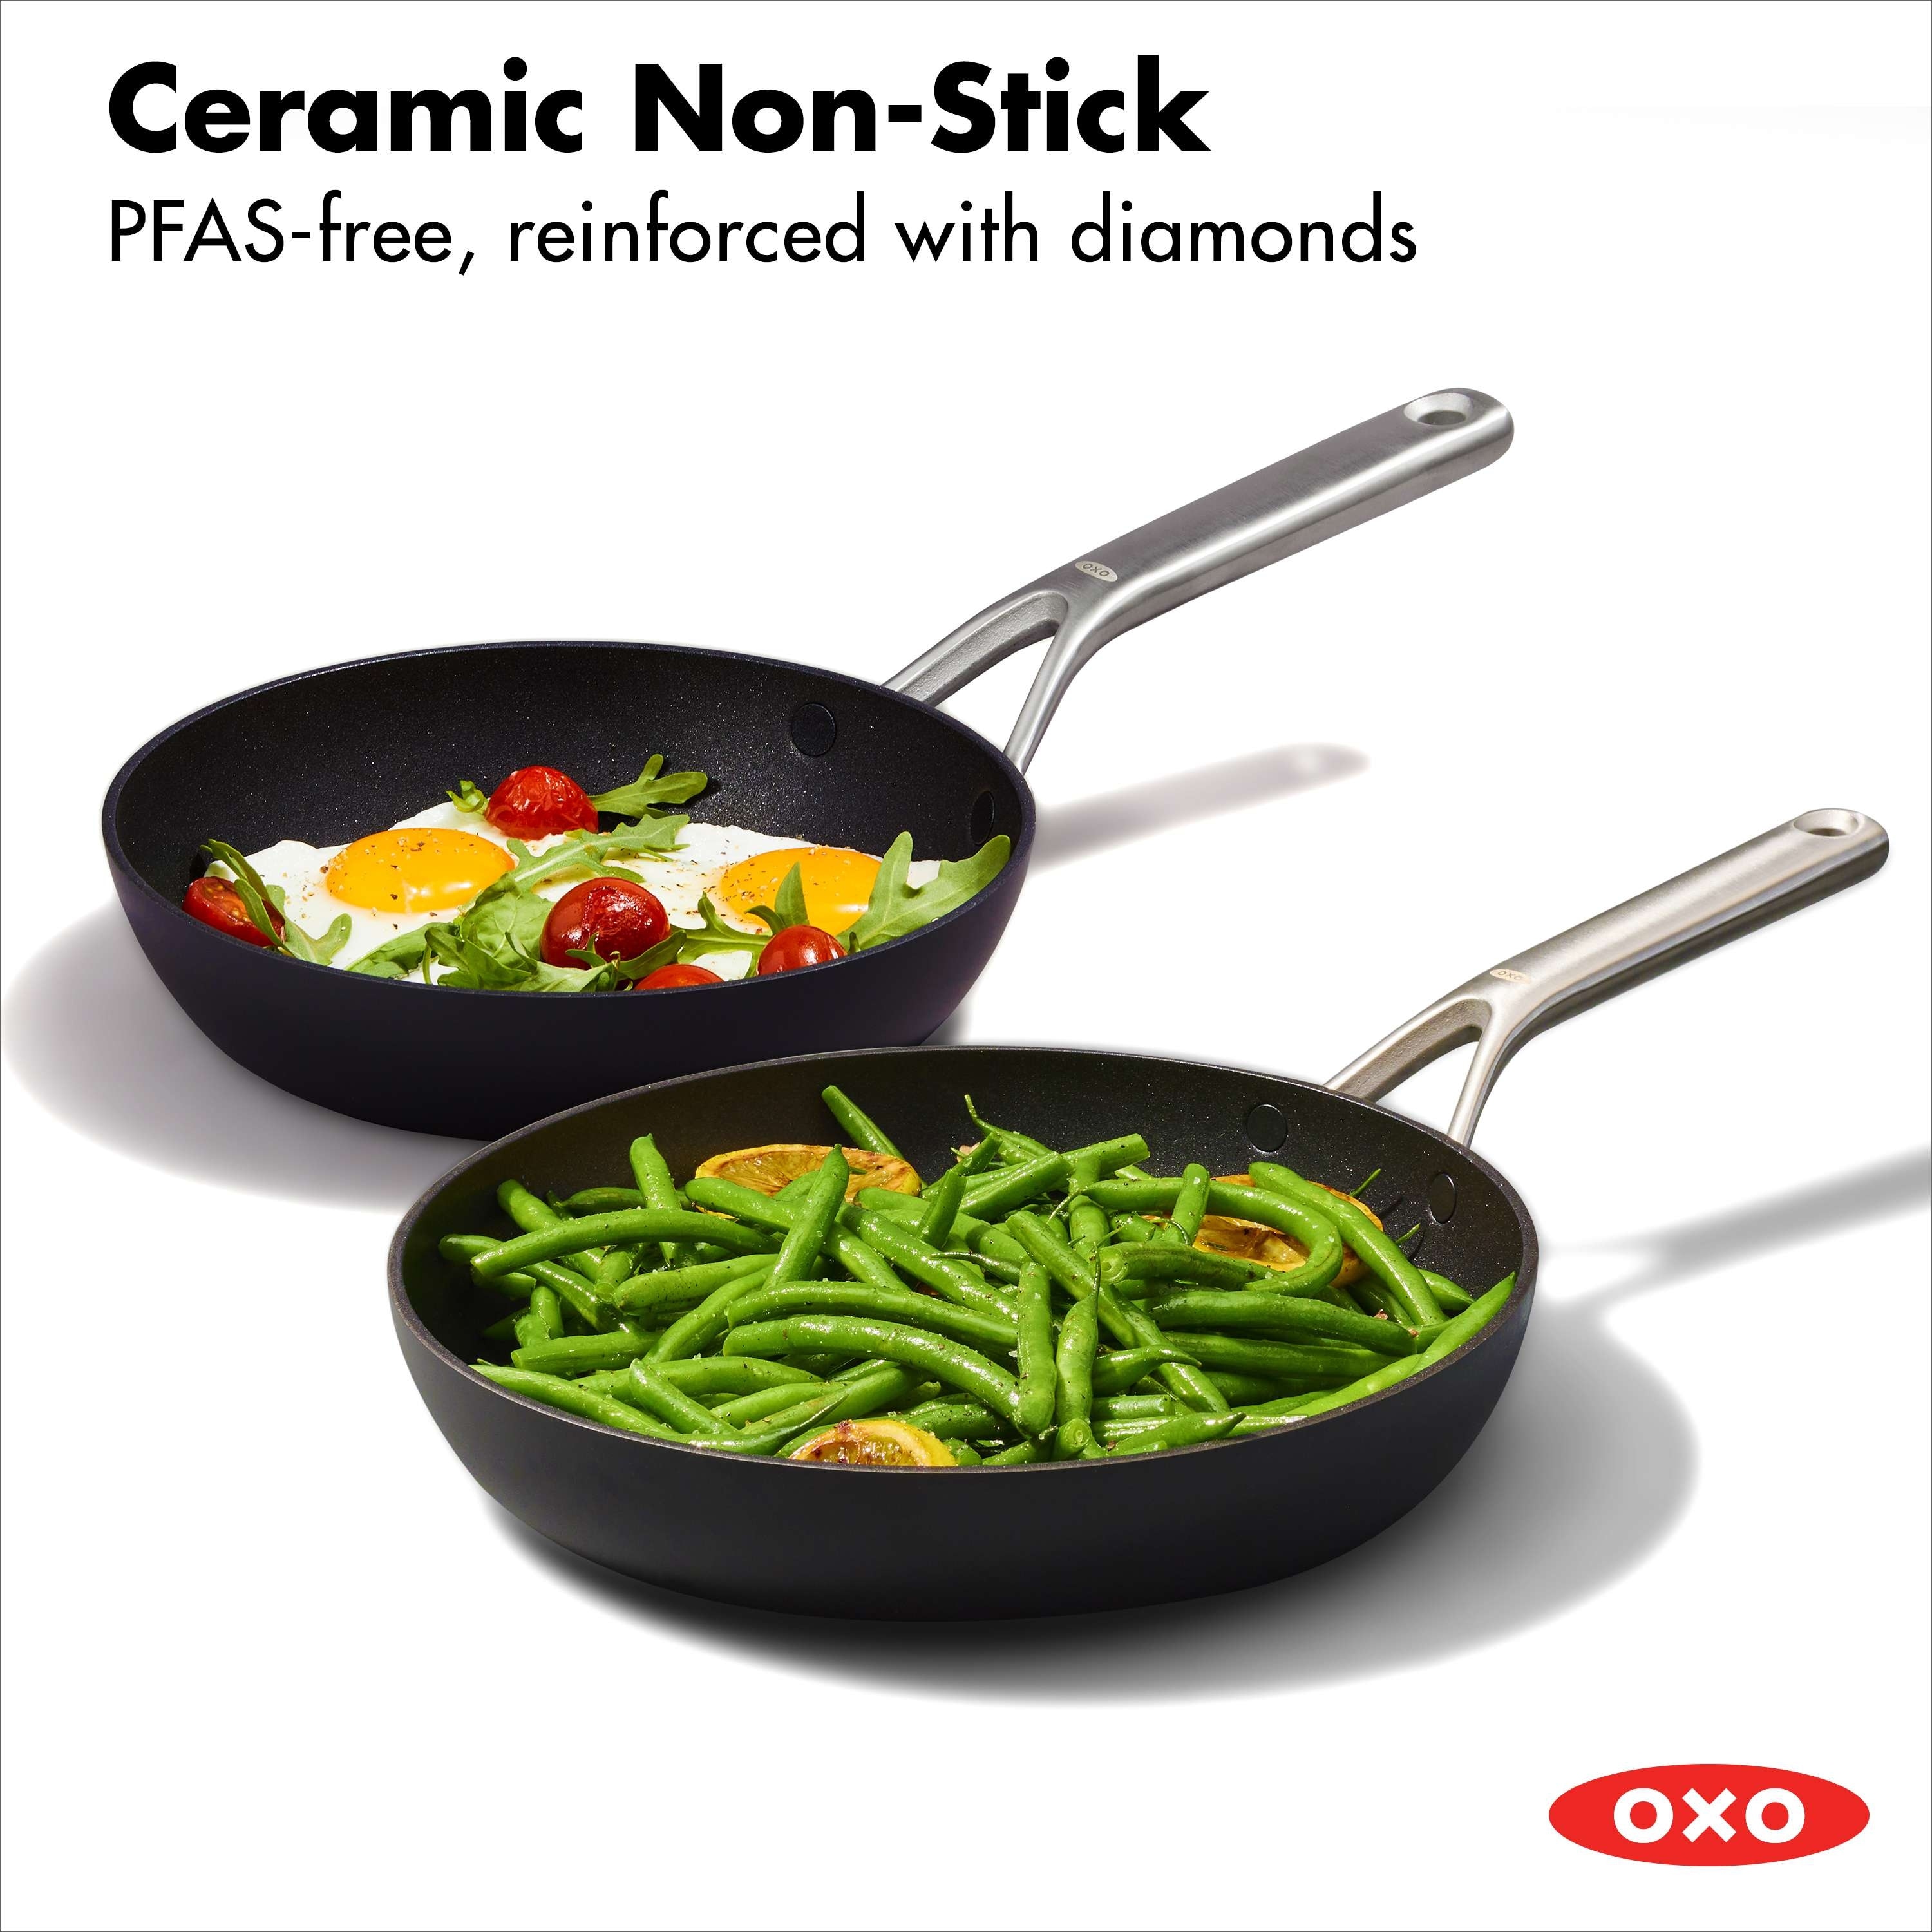 https://ak1.ostkcdn.com/images/products/is/images/direct/87f1834f01840c8ea46c31095c7e02ce5c19a6f9/OXO-Professional-Ceramic-Non-Stick-2-Piece-Frying-Pan-Set%2C-8-In-and-10-In.jpg